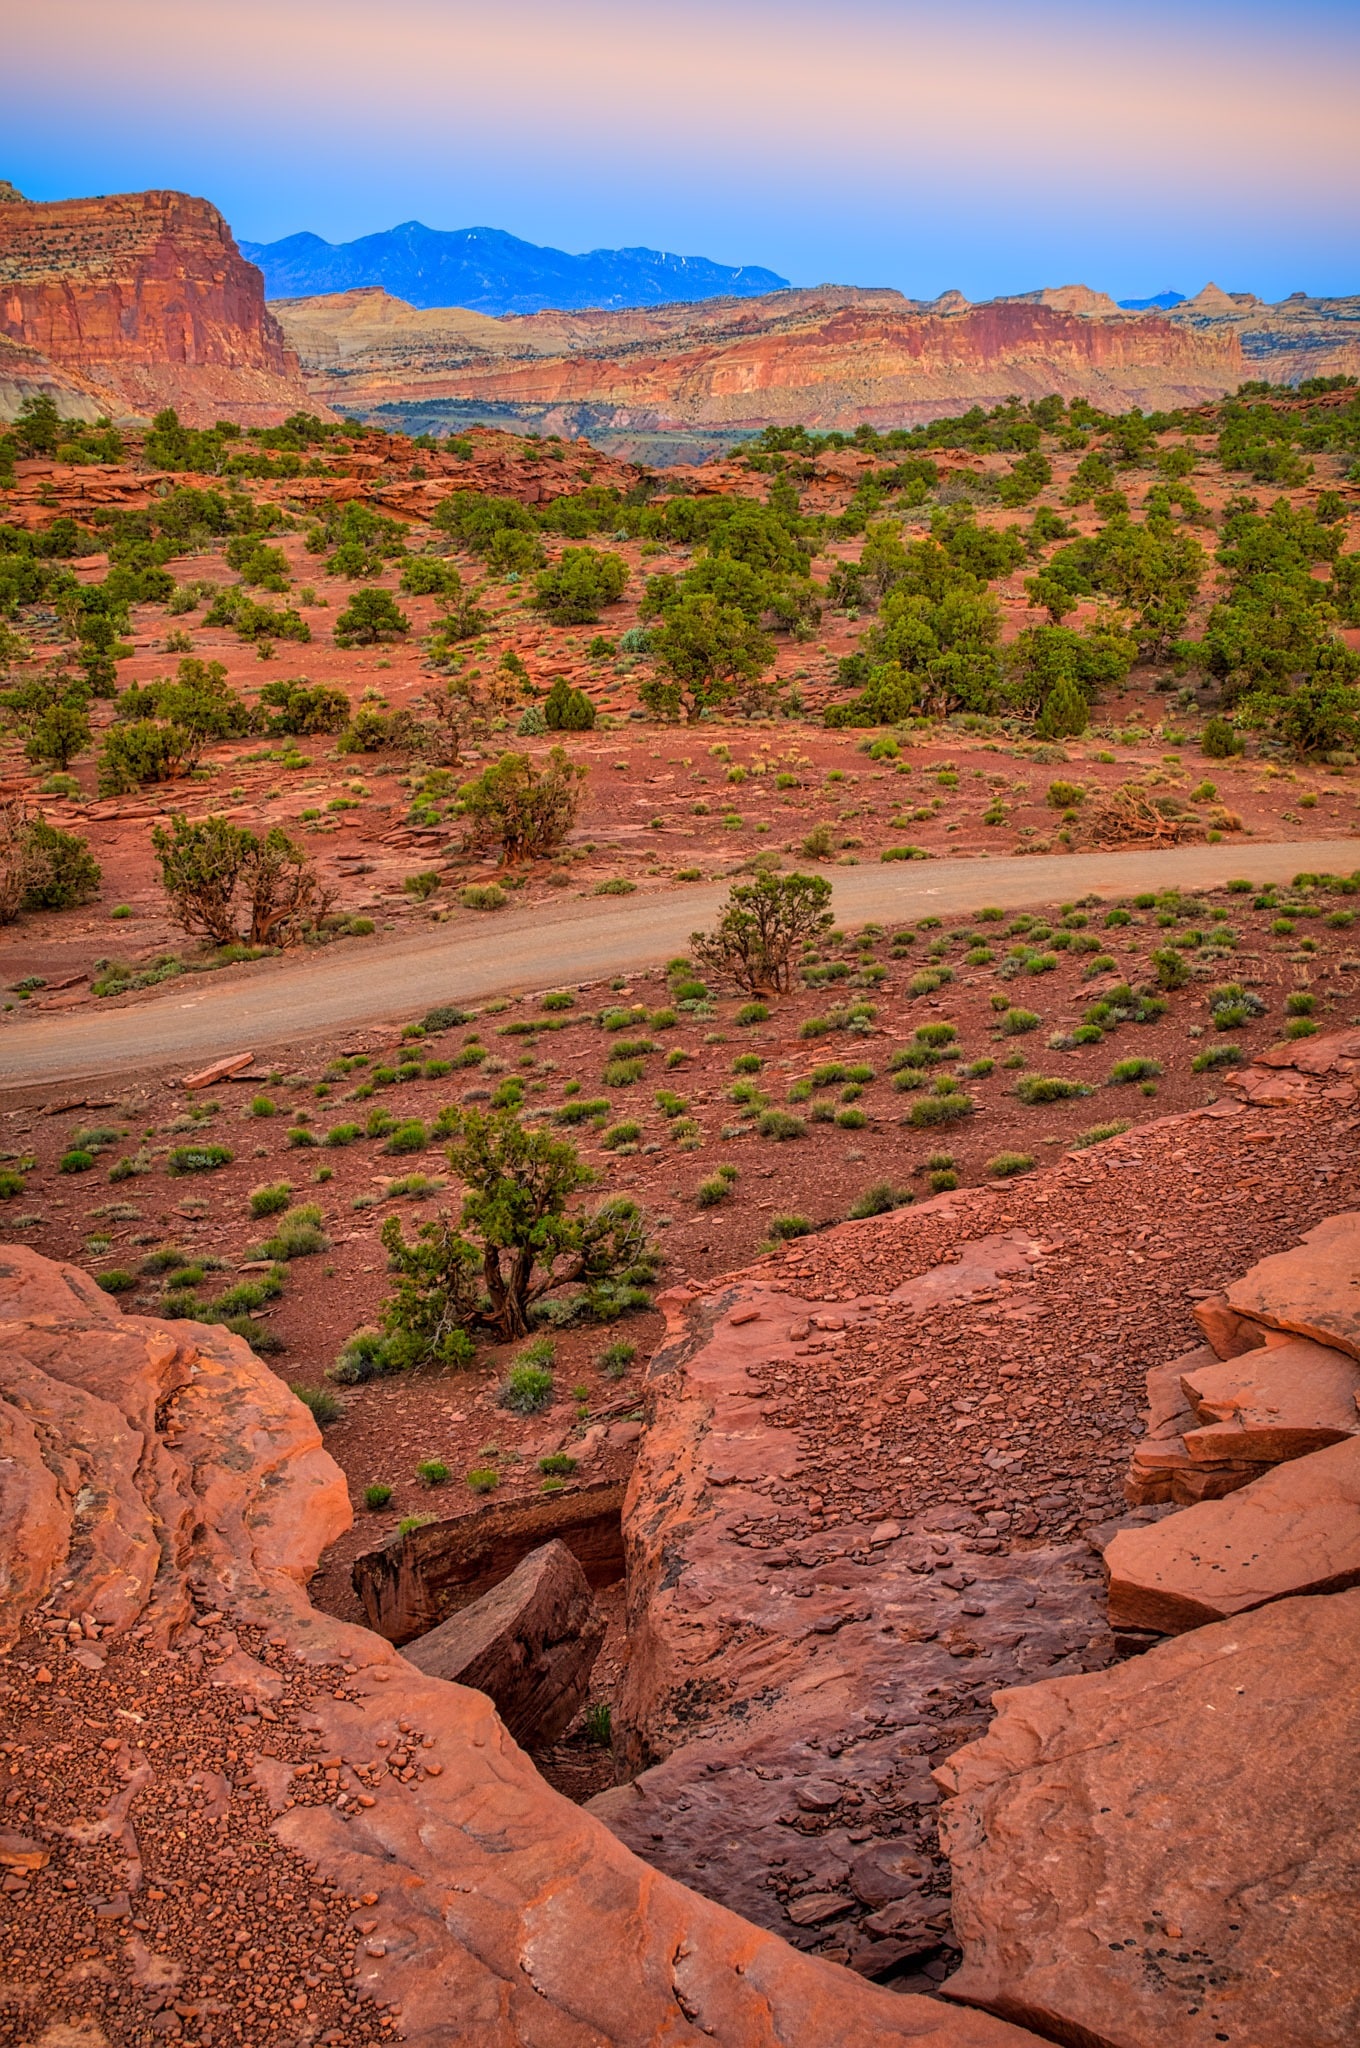 Twilight as seen from Panorama Point along Highway 24 in Capitol Reef National Park, Utah.